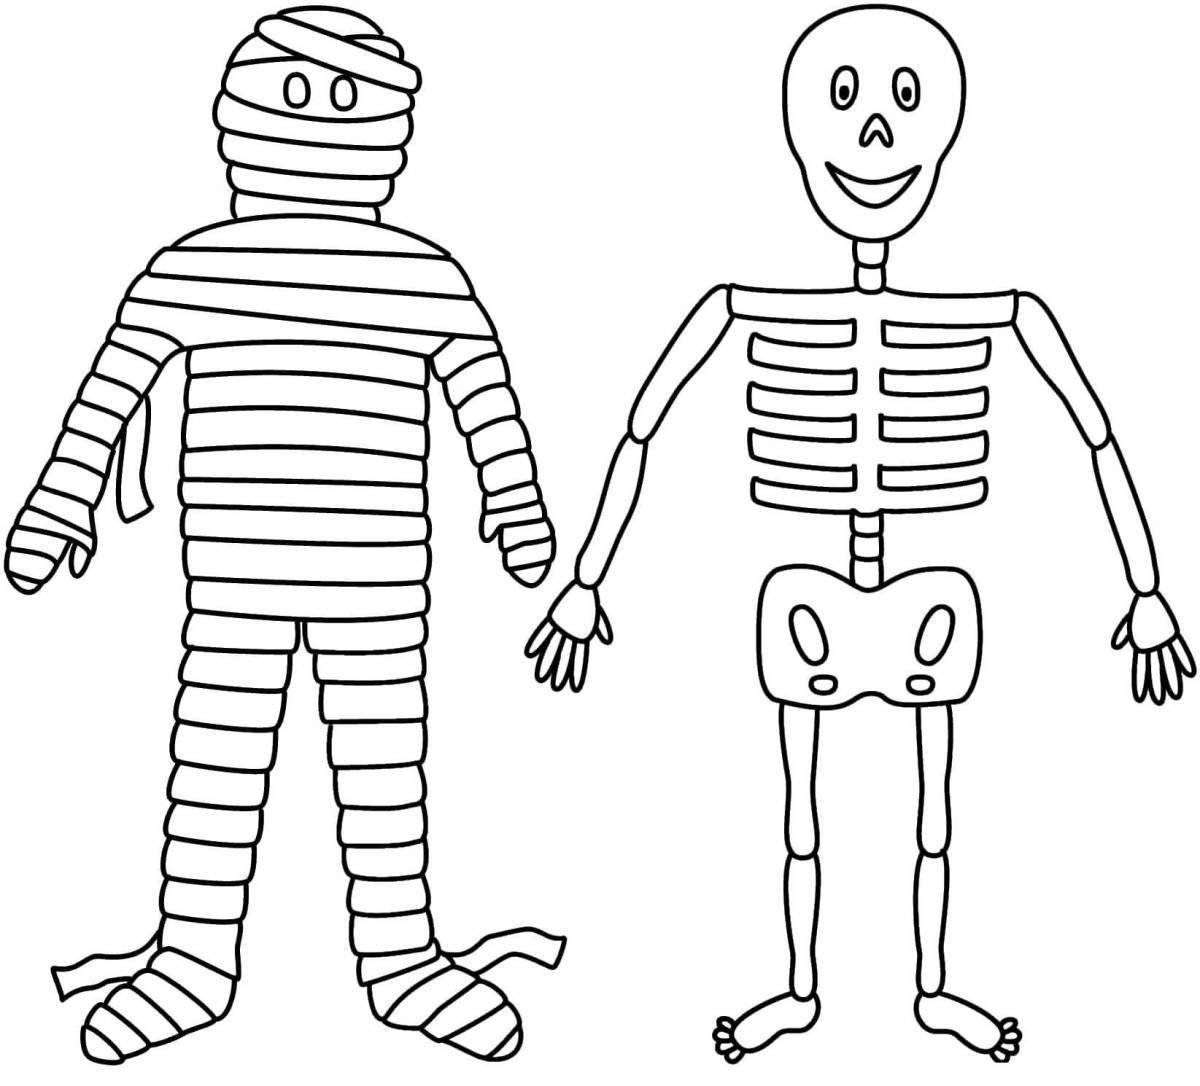 Colorful human skeleton coloring page for kids